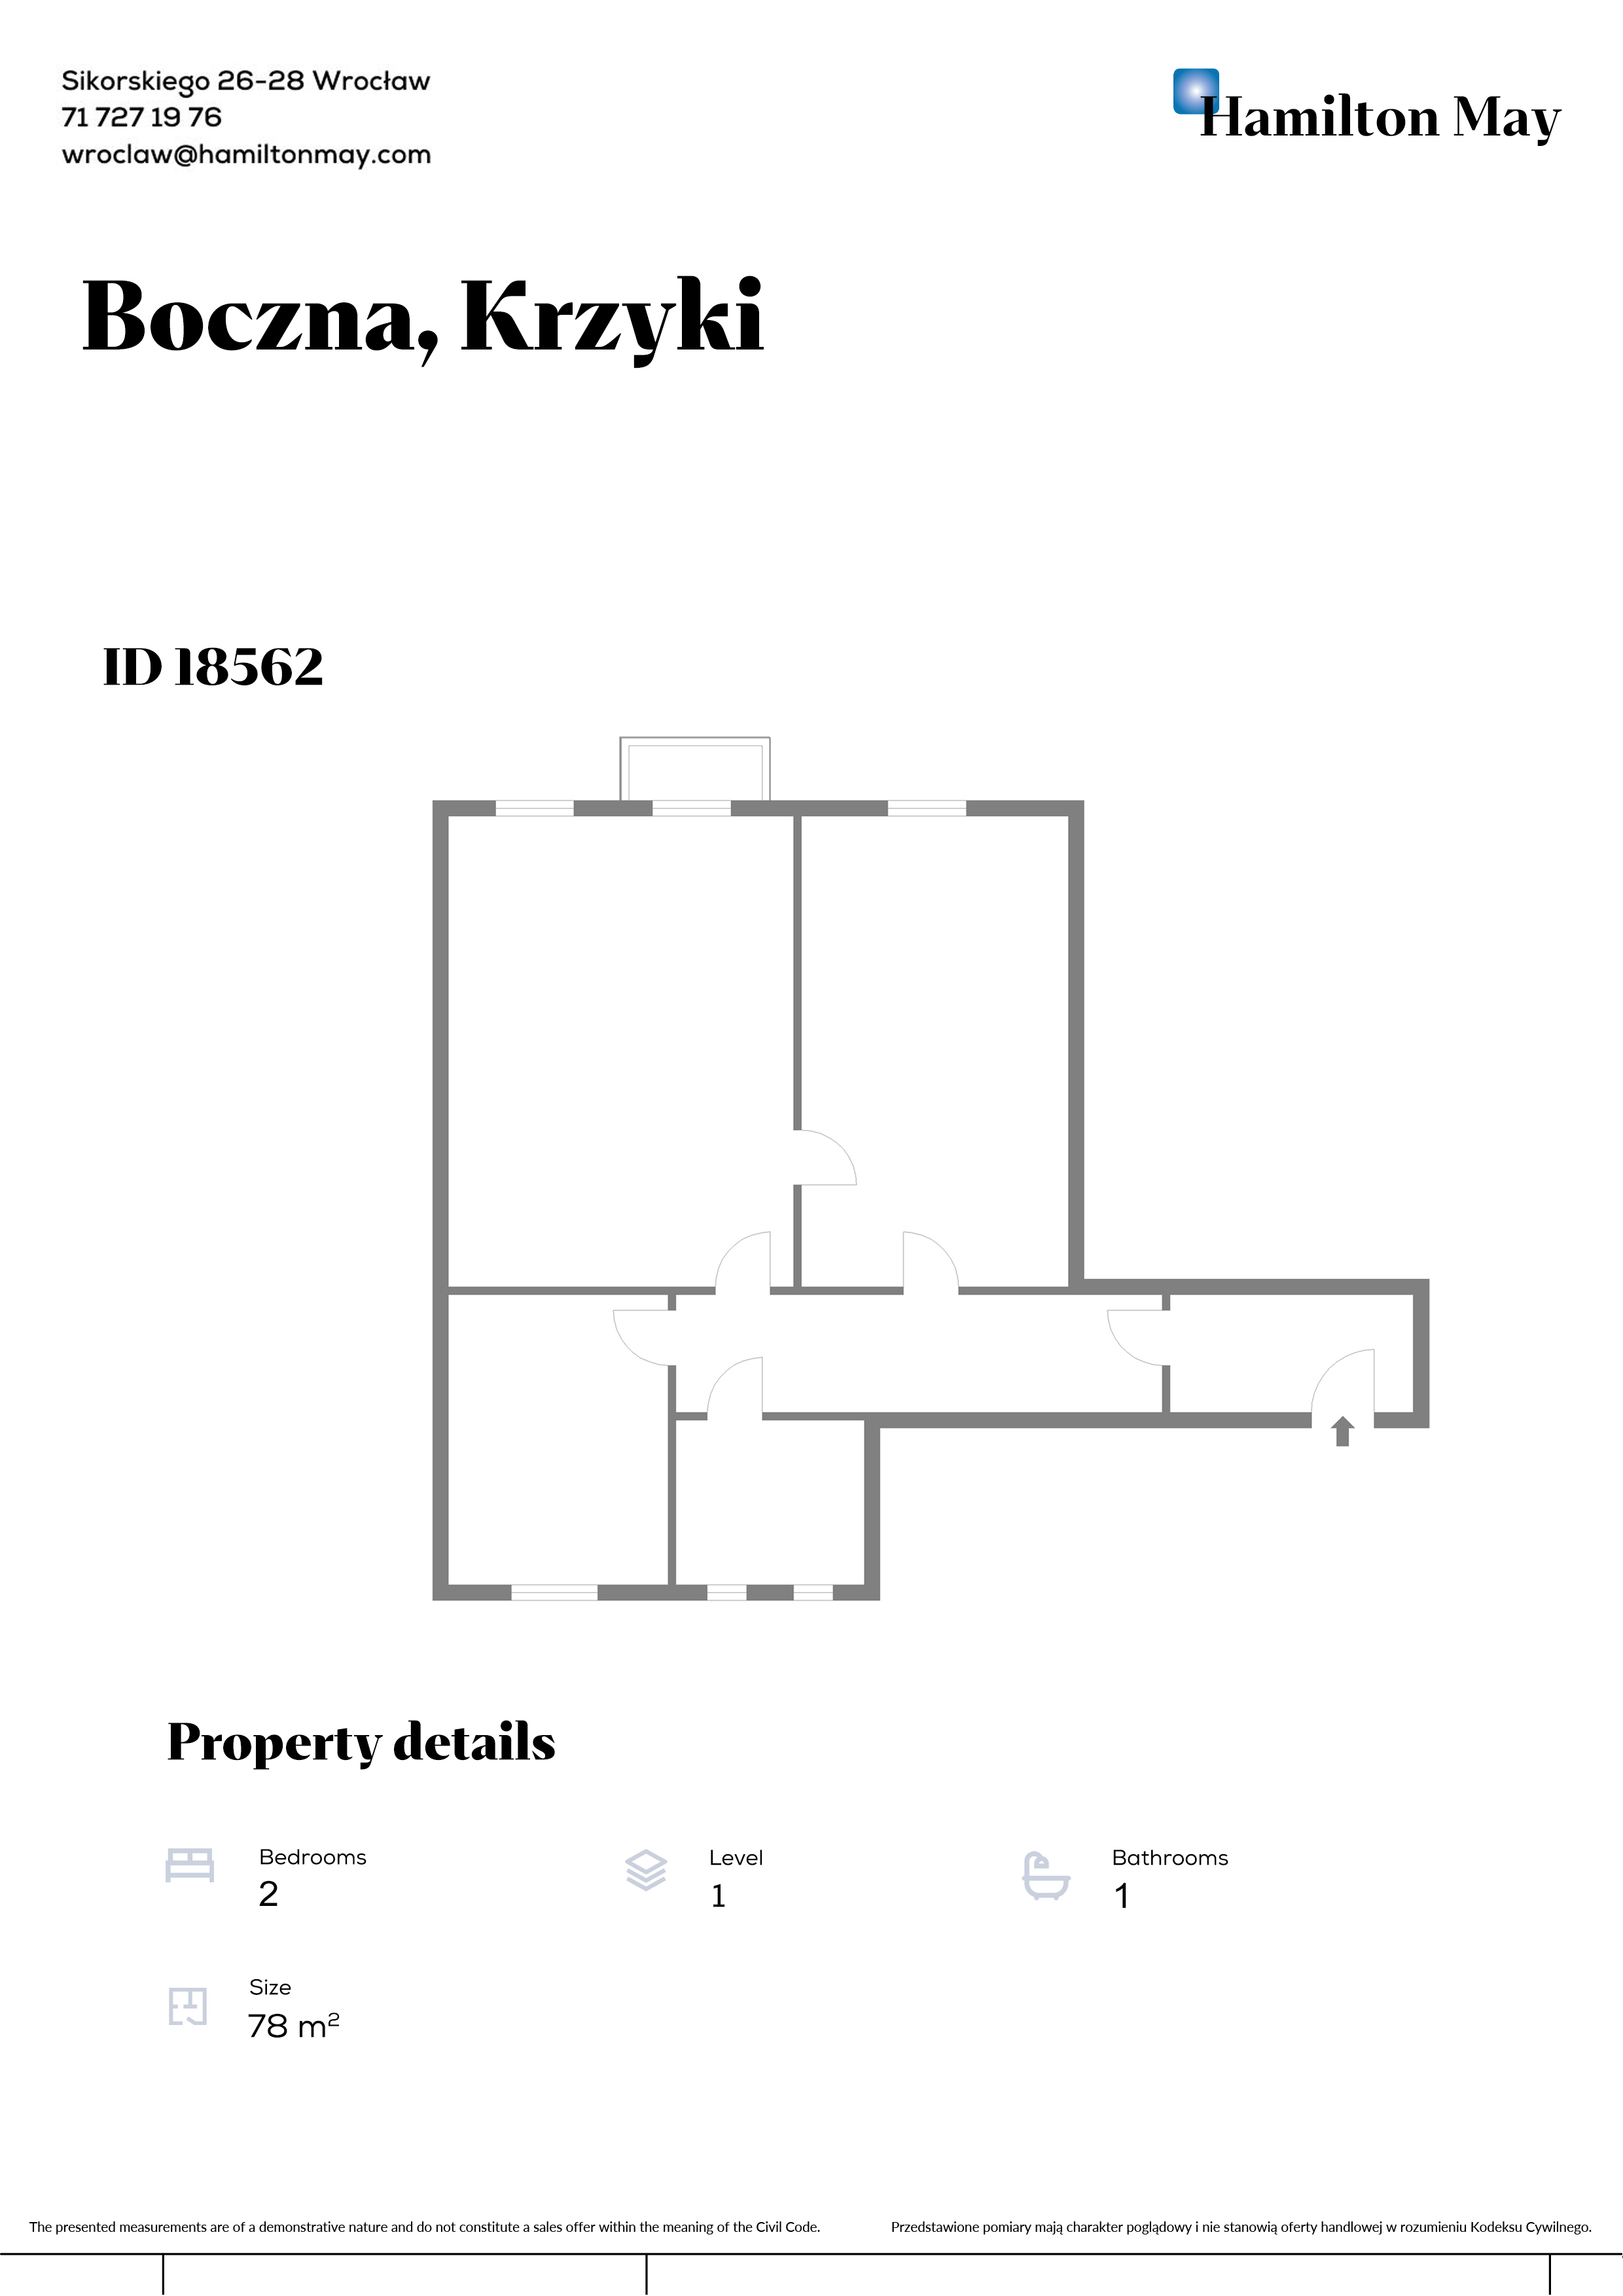 Premium apartment in a renovated tenement house - plan